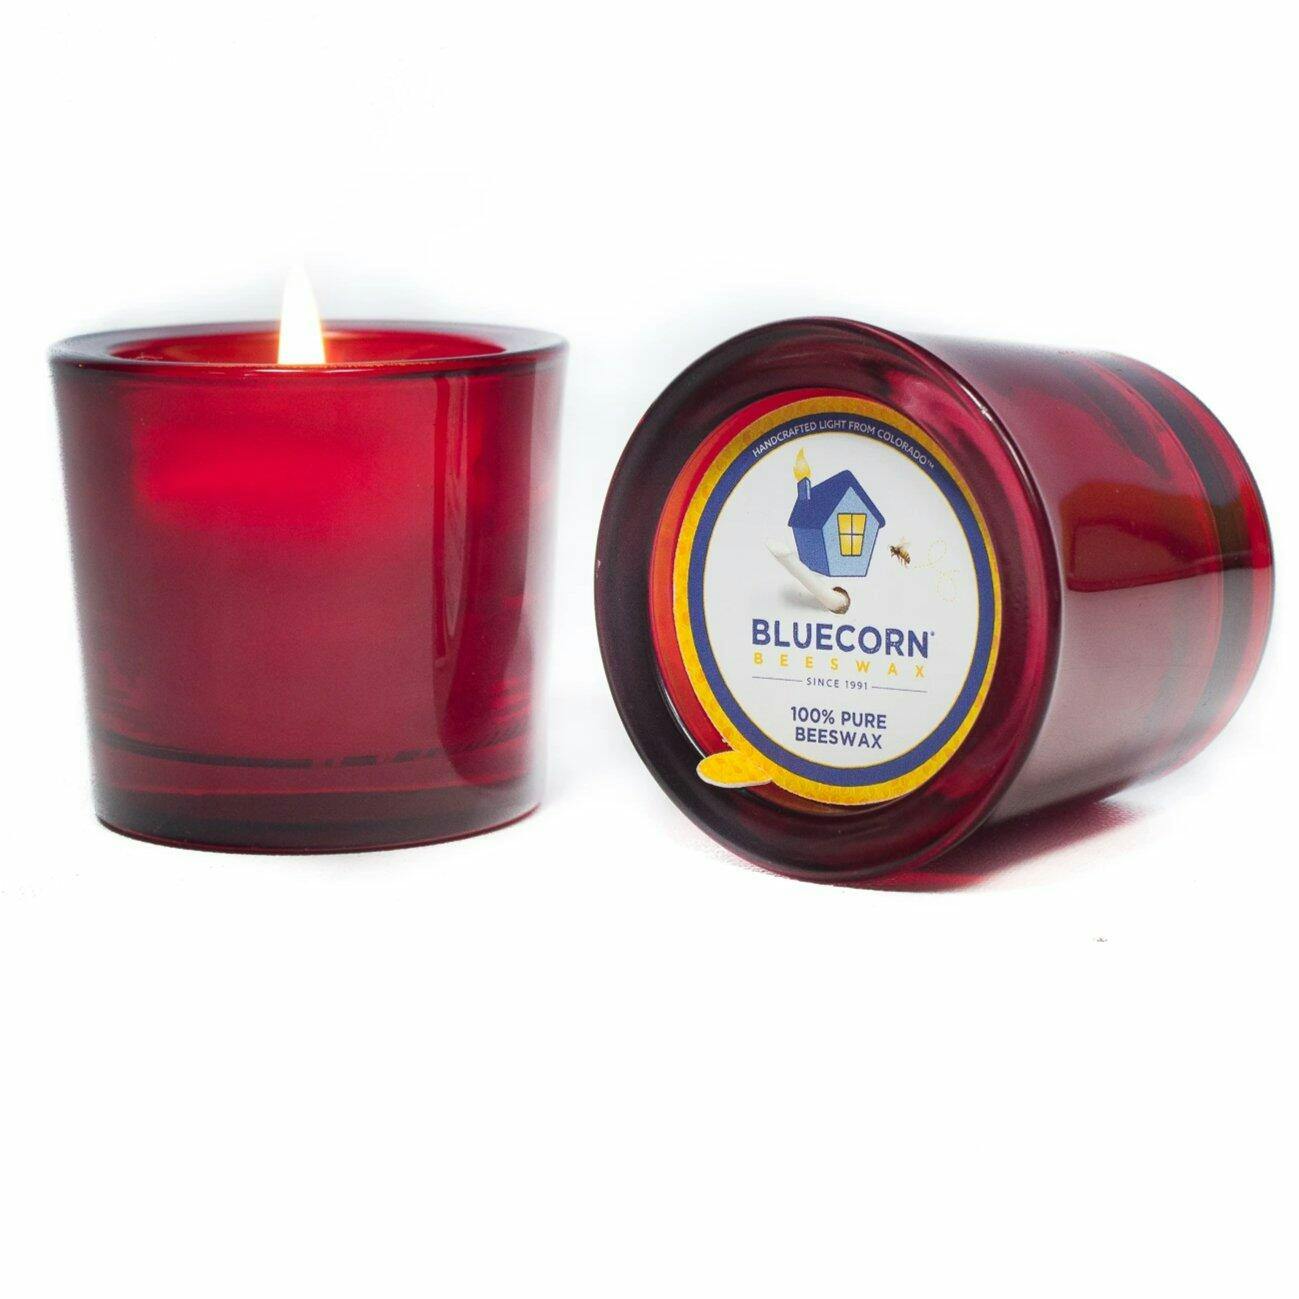 Bluecorn Candles wholesale products